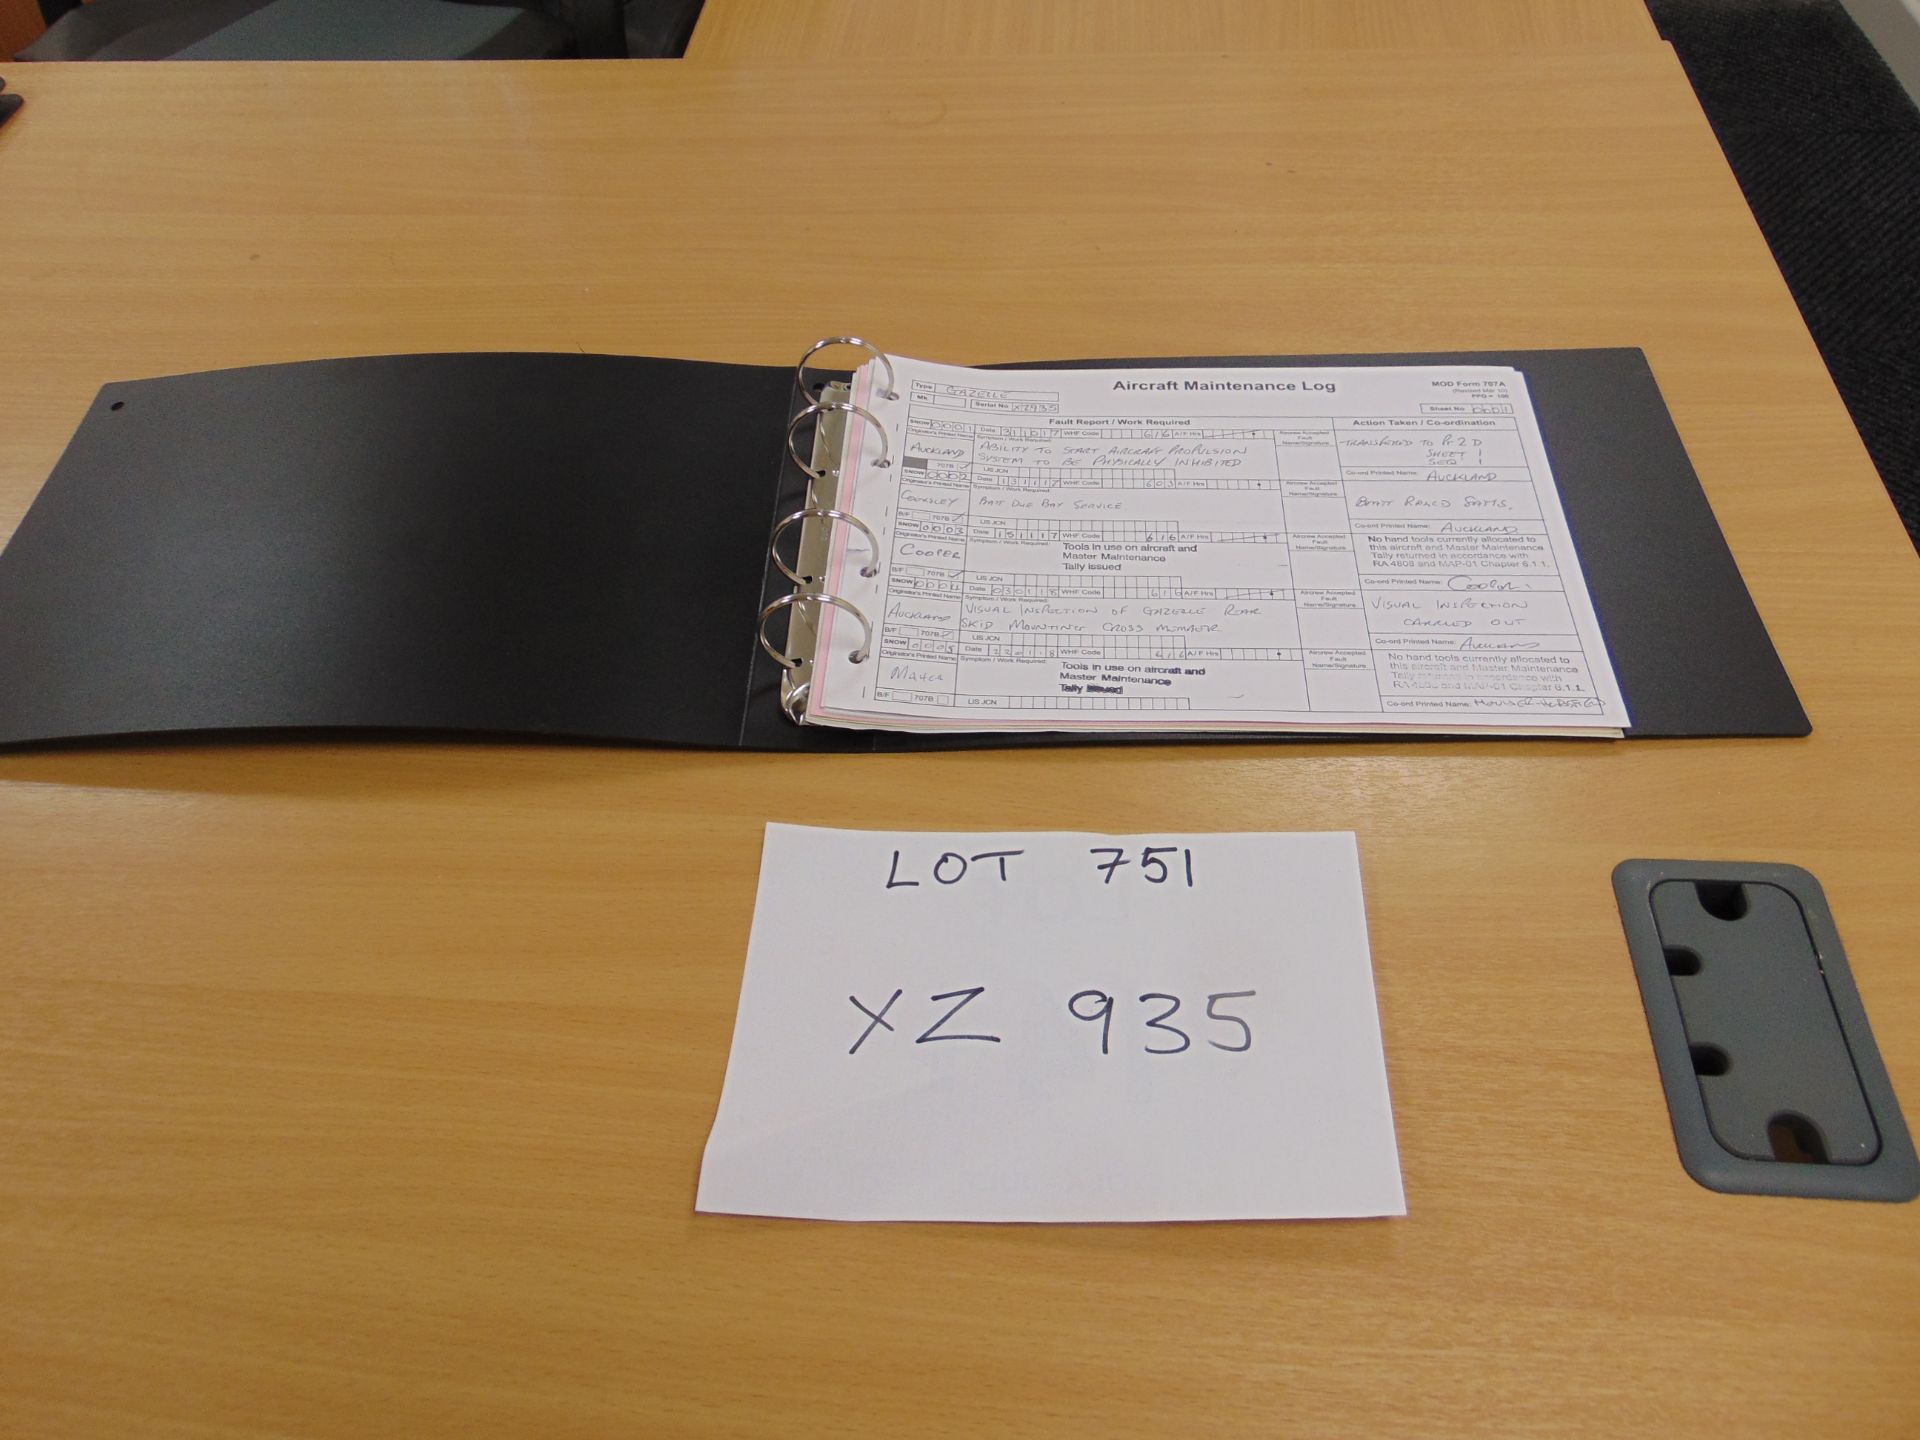 GAZELLE TURBINE HELICOPTER XZ935 Sn 1742 From the UK Ministry of Defence with paperwork as shown. - Image 20 of 22